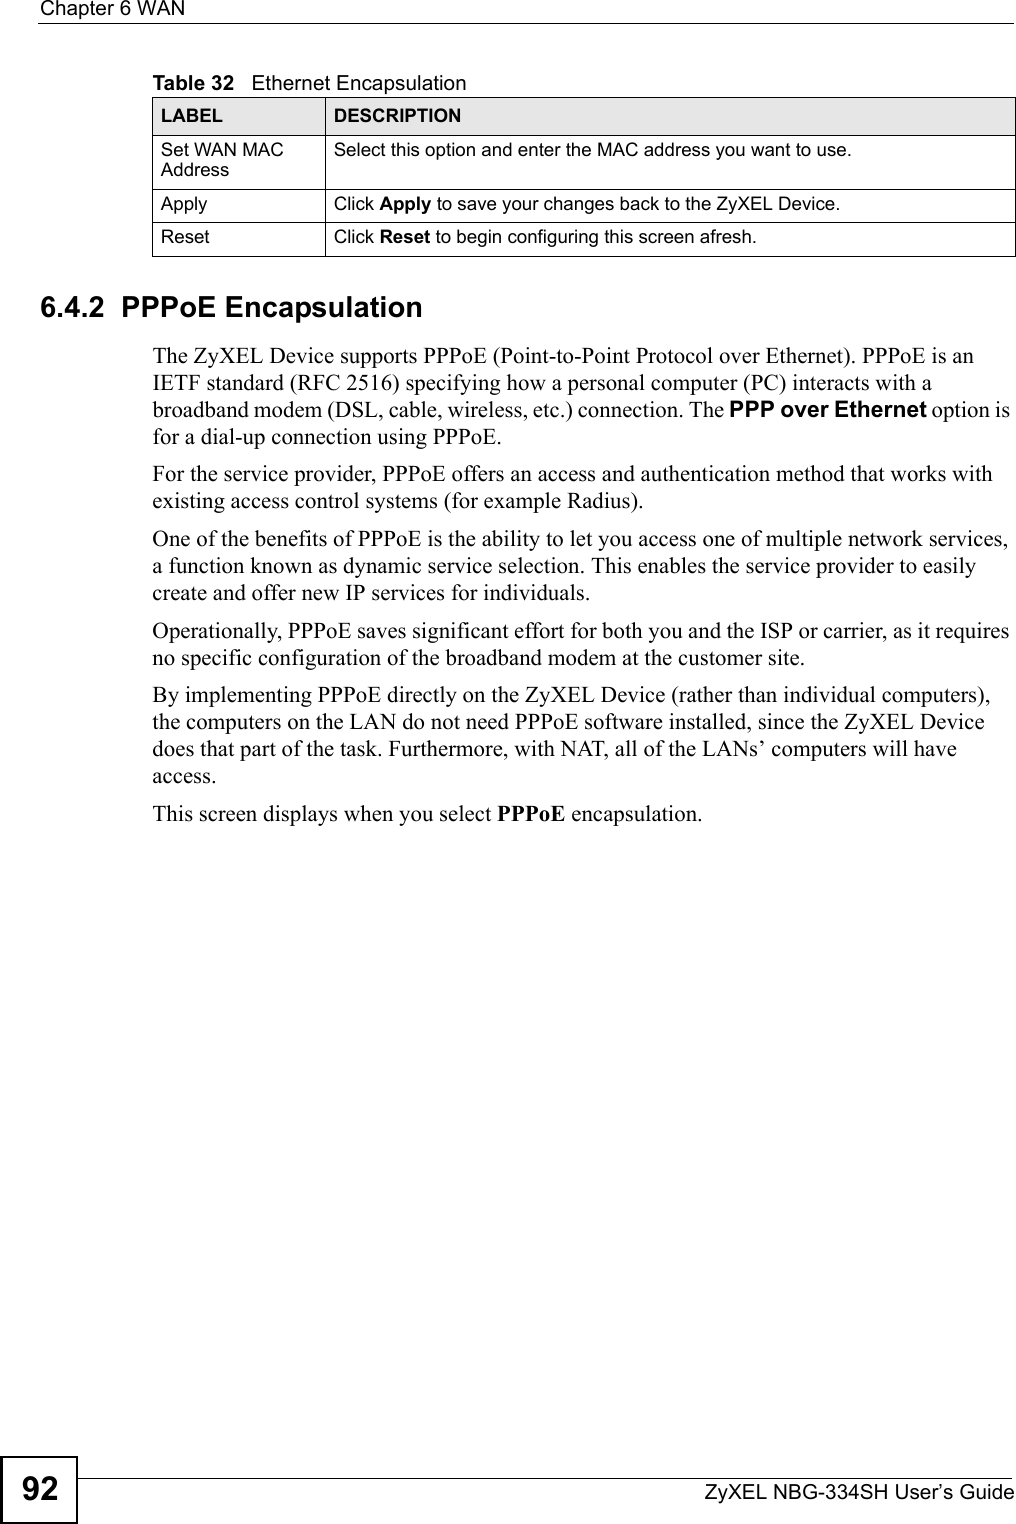 Chapter 6 WANZyXEL NBG-334SH User’s Guide926.4.2  PPPoE EncapsulationThe ZyXEL Device supports PPPoE (Point-to-Point Protocol over Ethernet). PPPoE is an IETF standard (RFC 2516) specifying how a personal computer (PC) interacts with a broadband modem (DSL, cable, wireless, etc.) connection. The PPP over Ethernet option is for a dial-up connection using PPPoE.For the service provider, PPPoE offers an access and authentication method that works with existing access control systems (for example Radius).One of the benefits of PPPoE is the ability to let you access one of multiple network services, a function known as dynamic service selection. This enables the service provider to easily create and offer new IP services for individuals.Operationally, PPPoE saves significant effort for both you and the ISP or carrier, as it requires no specific configuration of the broadband modem at the customer site.By implementing PPPoE directly on the ZyXEL Device (rather than individual computers), the computers on the LAN do not need PPPoE software installed, since the ZyXEL Device does that part of the task. Furthermore, with NAT, all of the LANs’ computers will have access.This screen displays when you select PPPoE encapsulation.Set WAN MAC AddressSelect this option and enter the MAC address you want to use.Apply Click Apply to save your changes back to the ZyXEL Device.Reset Click Reset to begin configuring this screen afresh.Table 32   Ethernet EncapsulationLABEL DESCRIPTION